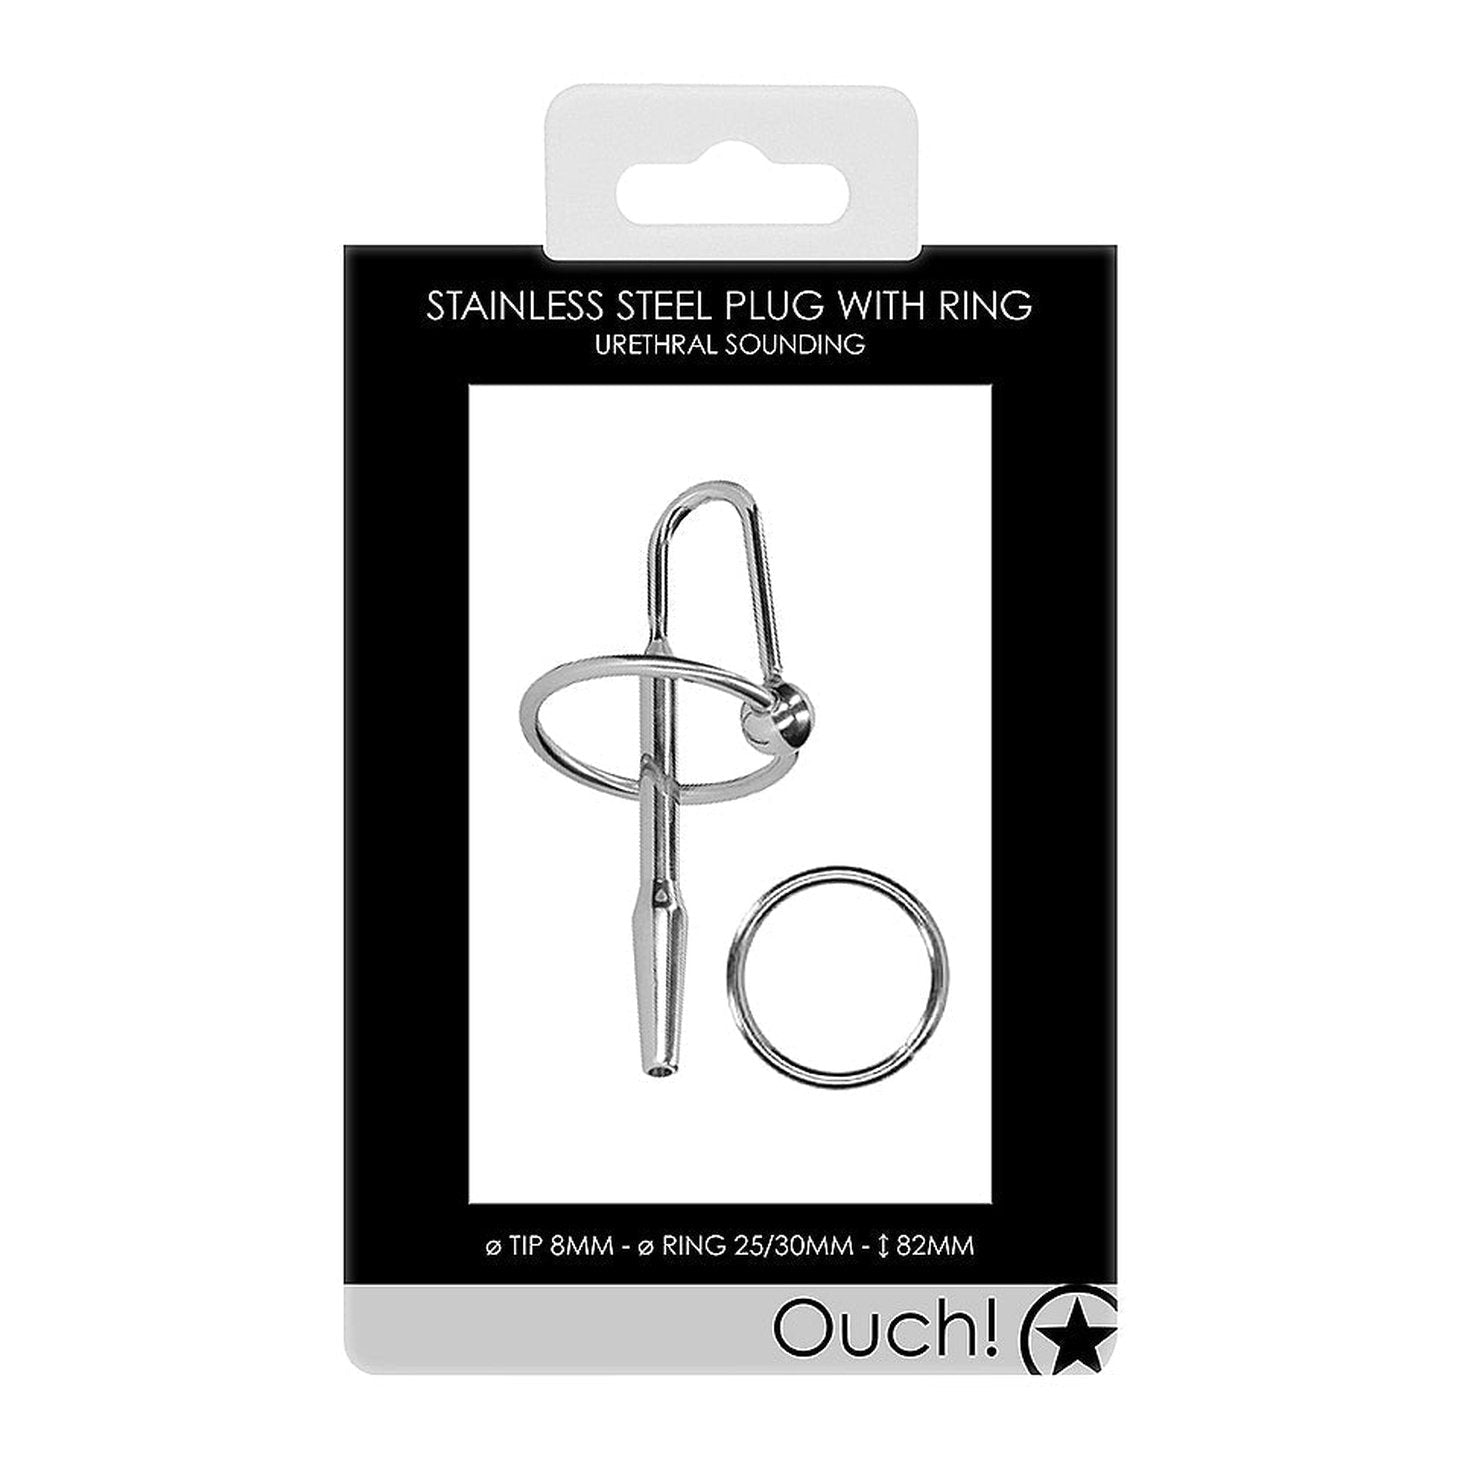 Urethral Sounding - Metal Plug Ouch!